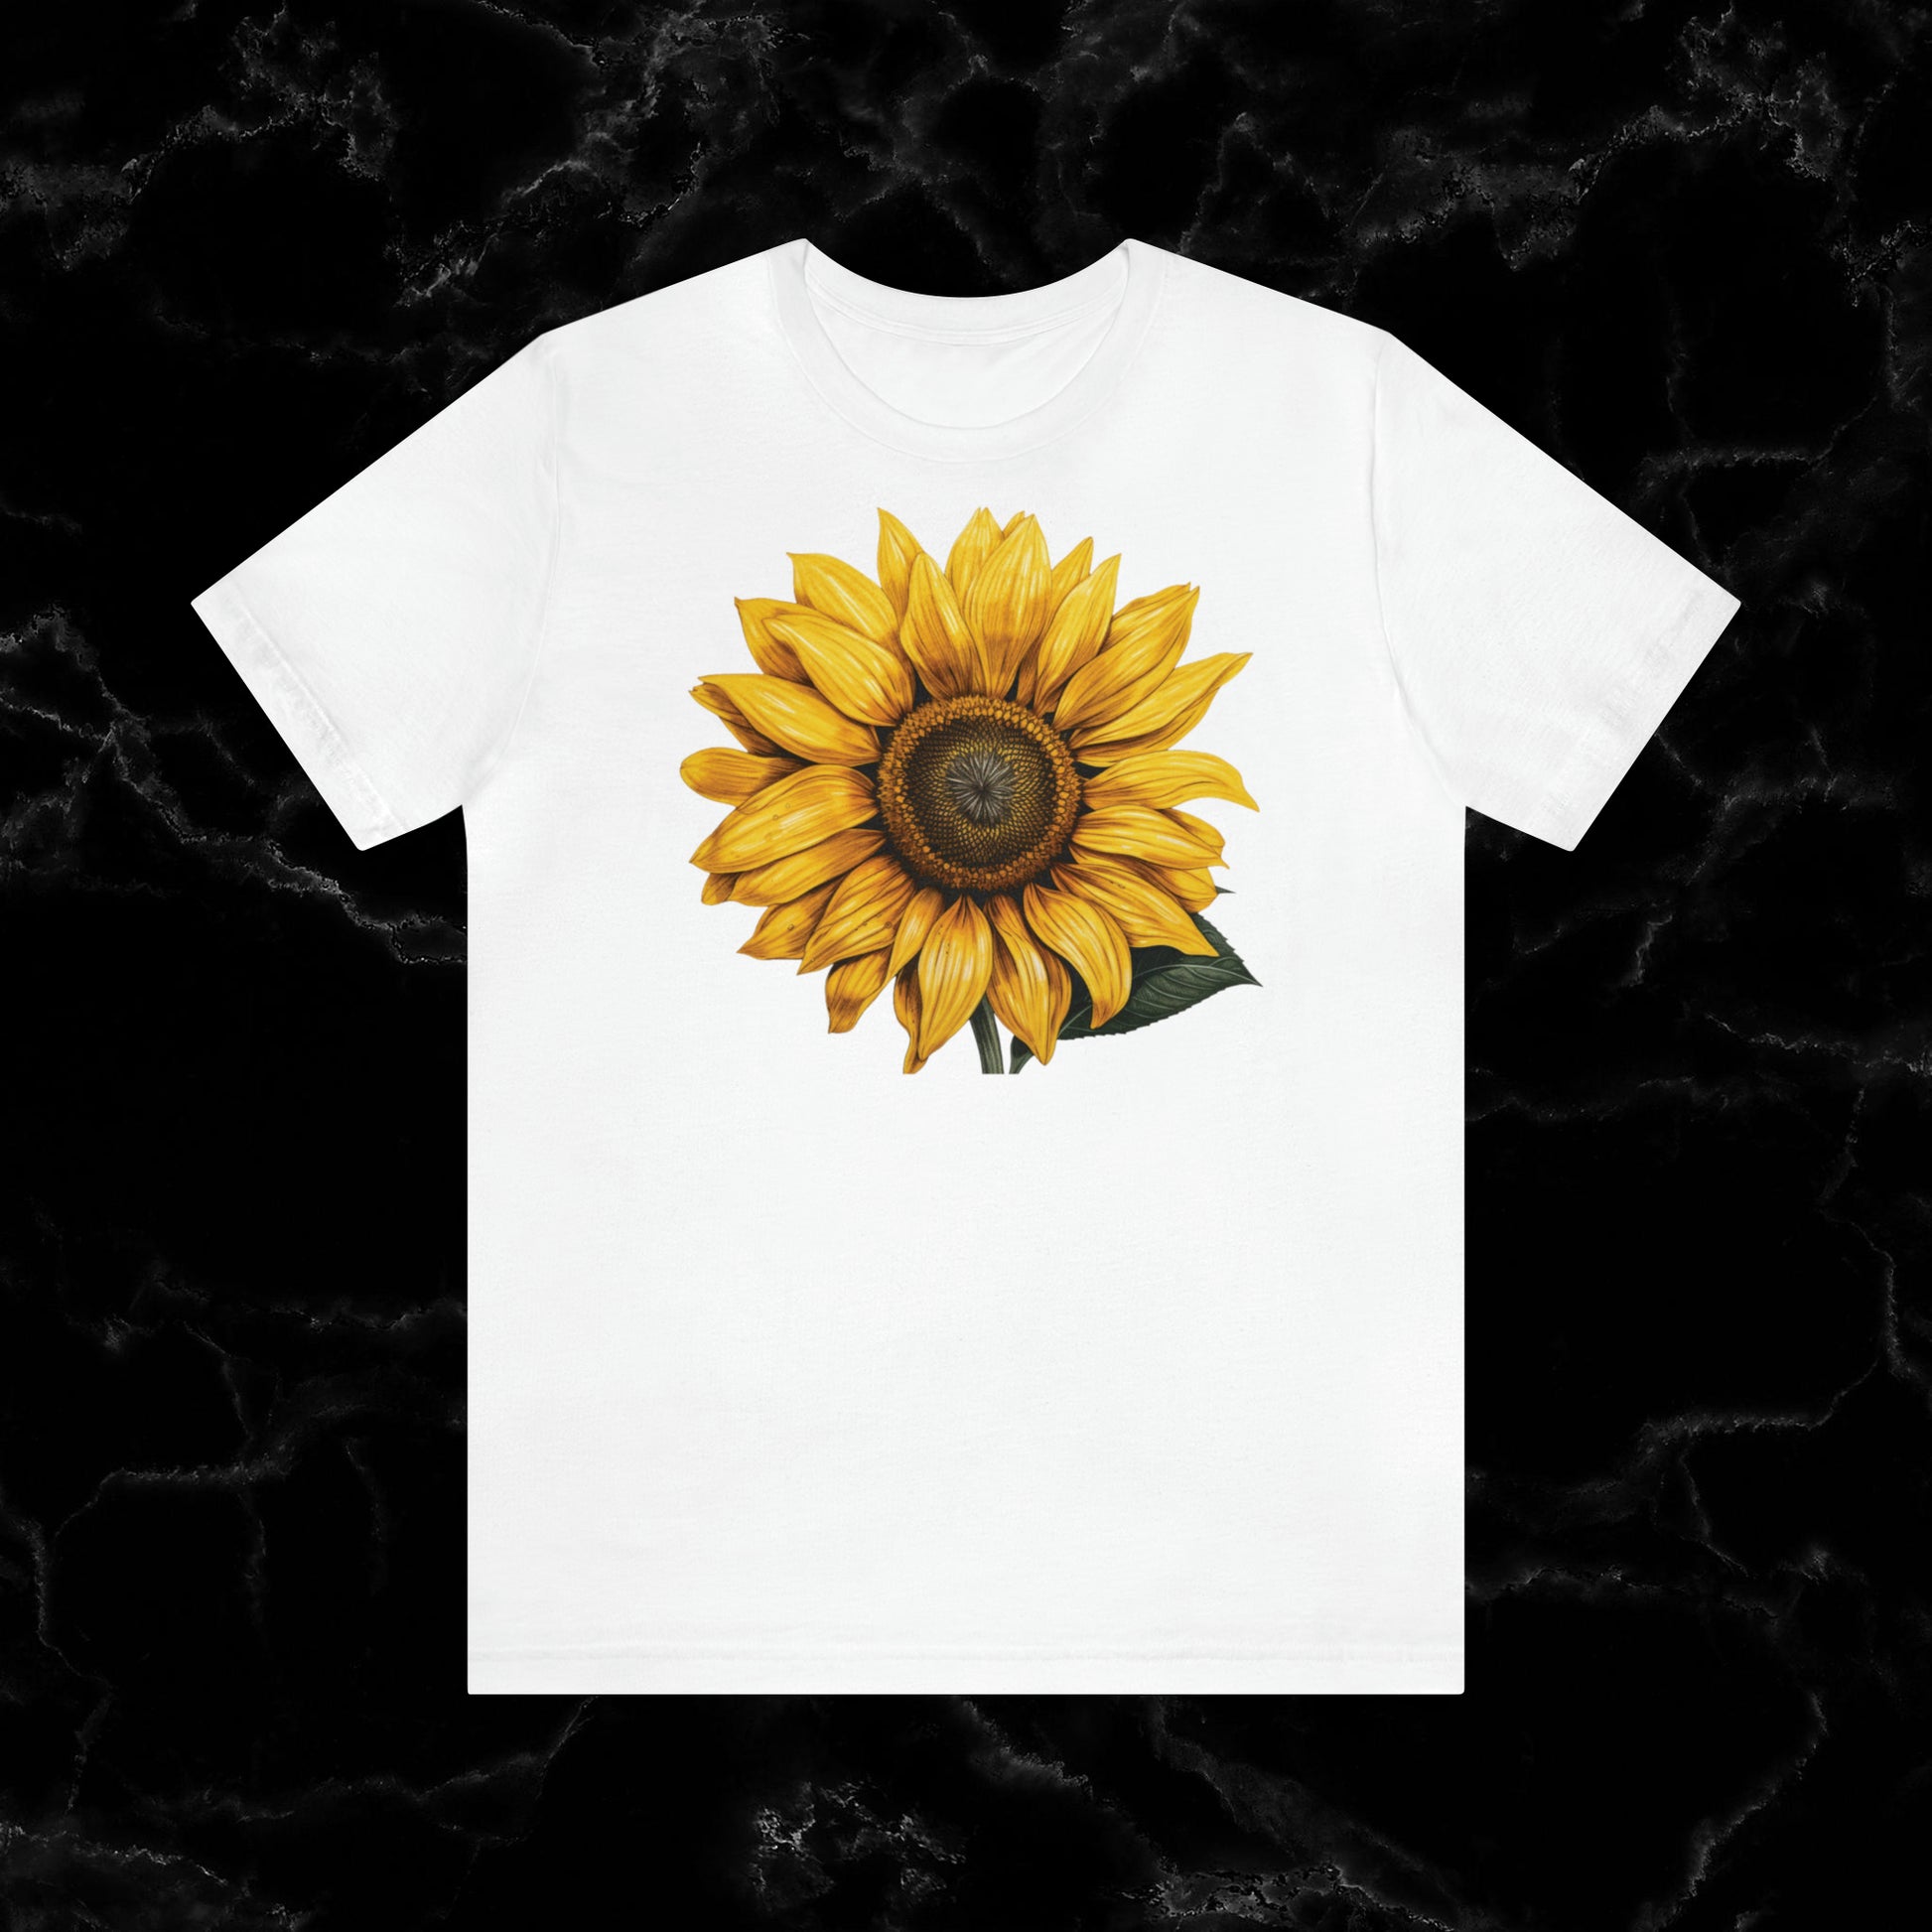 Sunflower Shirt Collection - Floral Tee, Garden Shirt, and Women's Fall Fashion Staples T-Shirt White S 